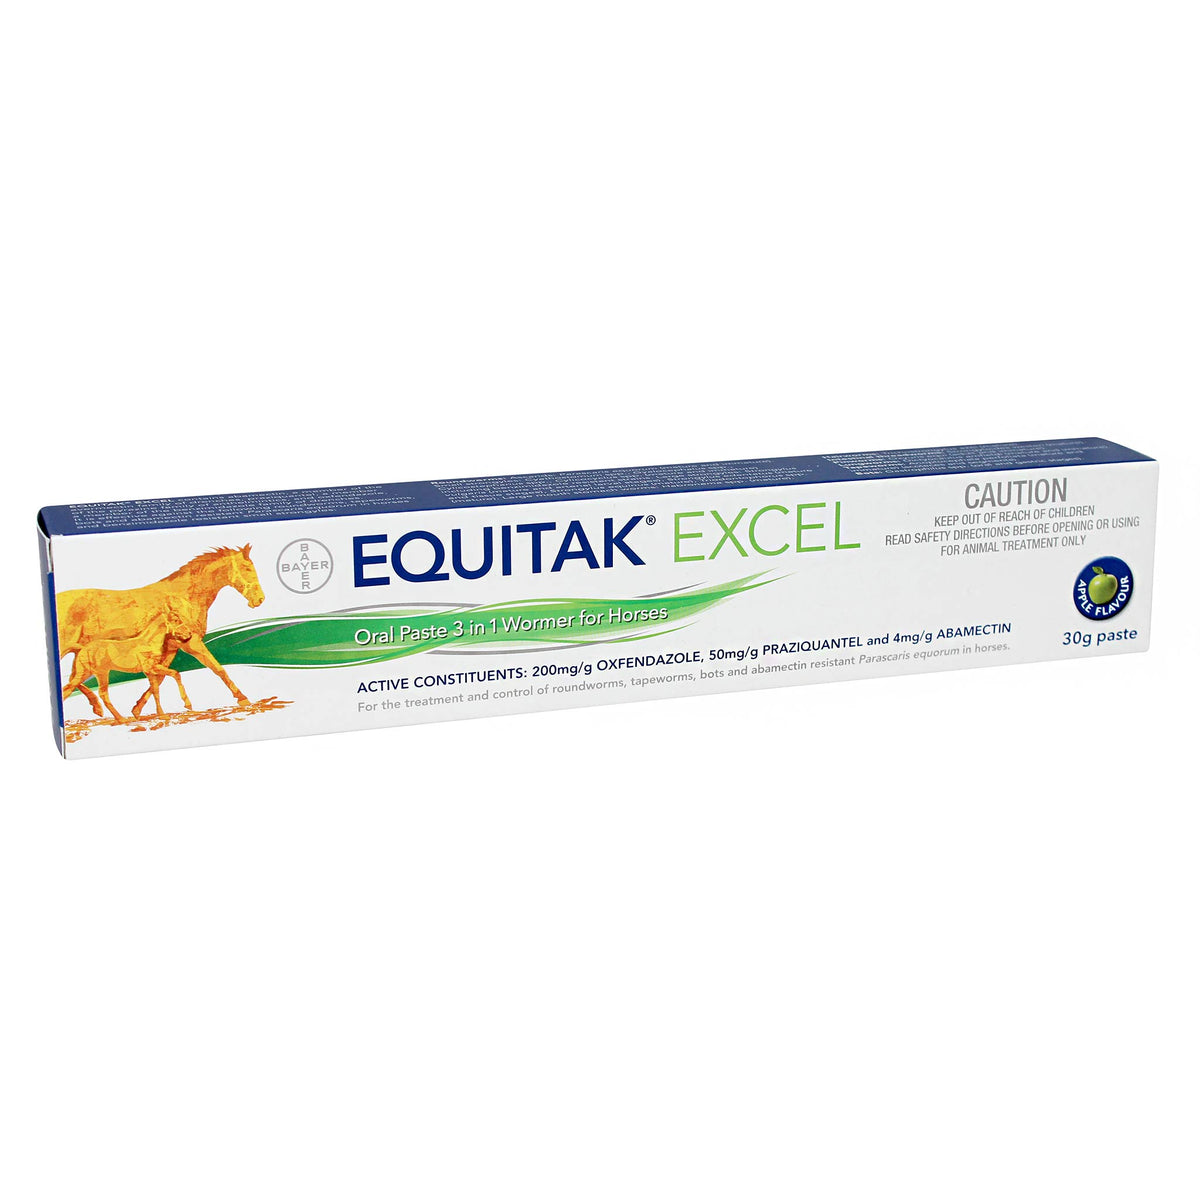 Equitak Excel 3 in 1 Wormer for Horses 30g